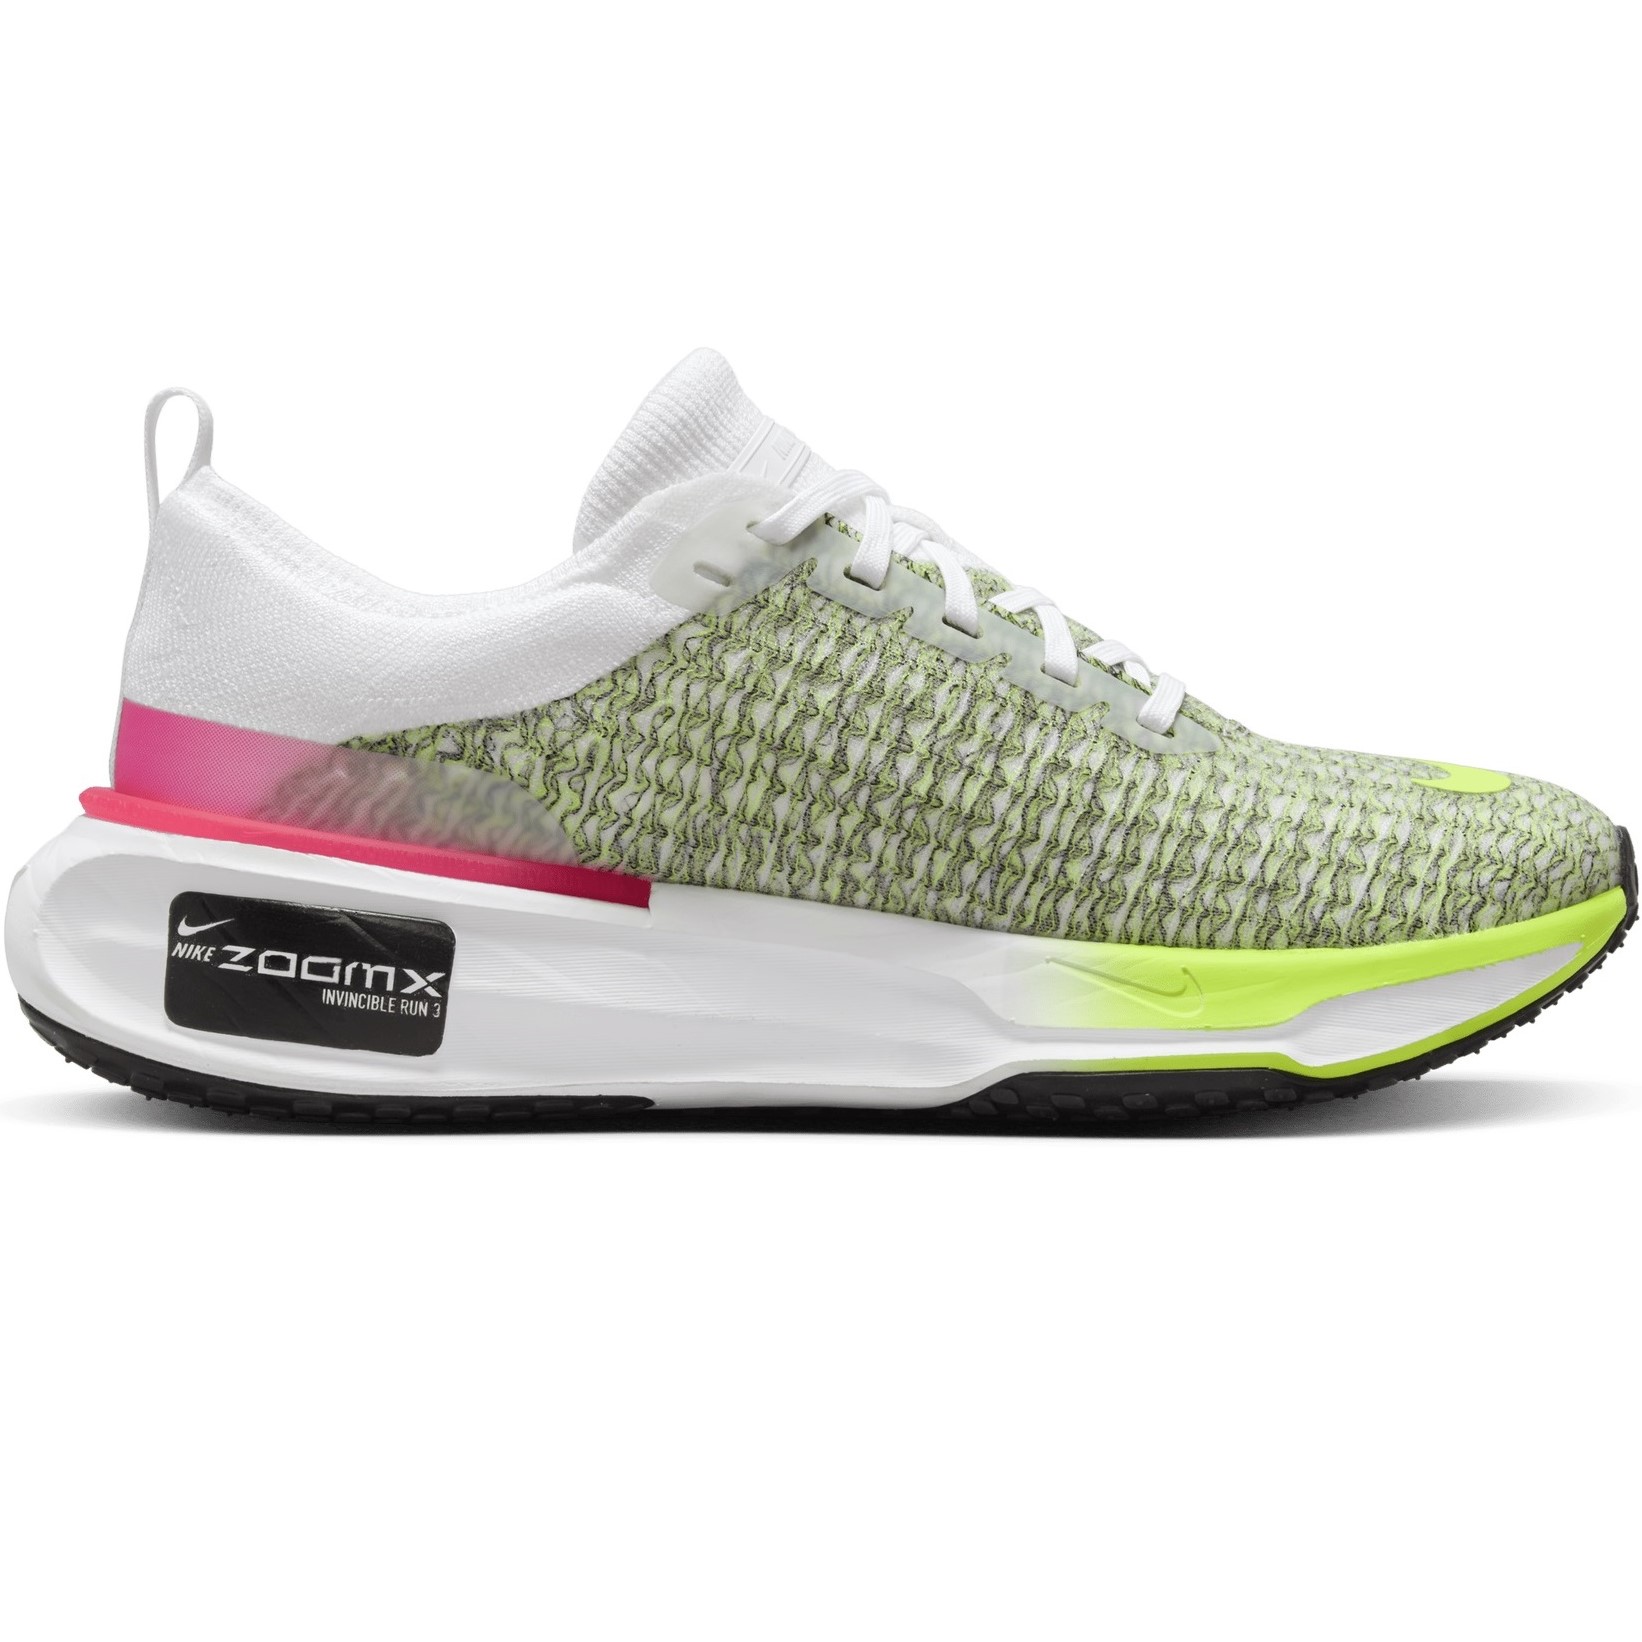 GIÀY NIKE NỮ WOMENS ZOOMX INVINCIBLE 3 ROAD RUNNING SHOES WHITE VOLT HYPER PINK FN6821-100 3